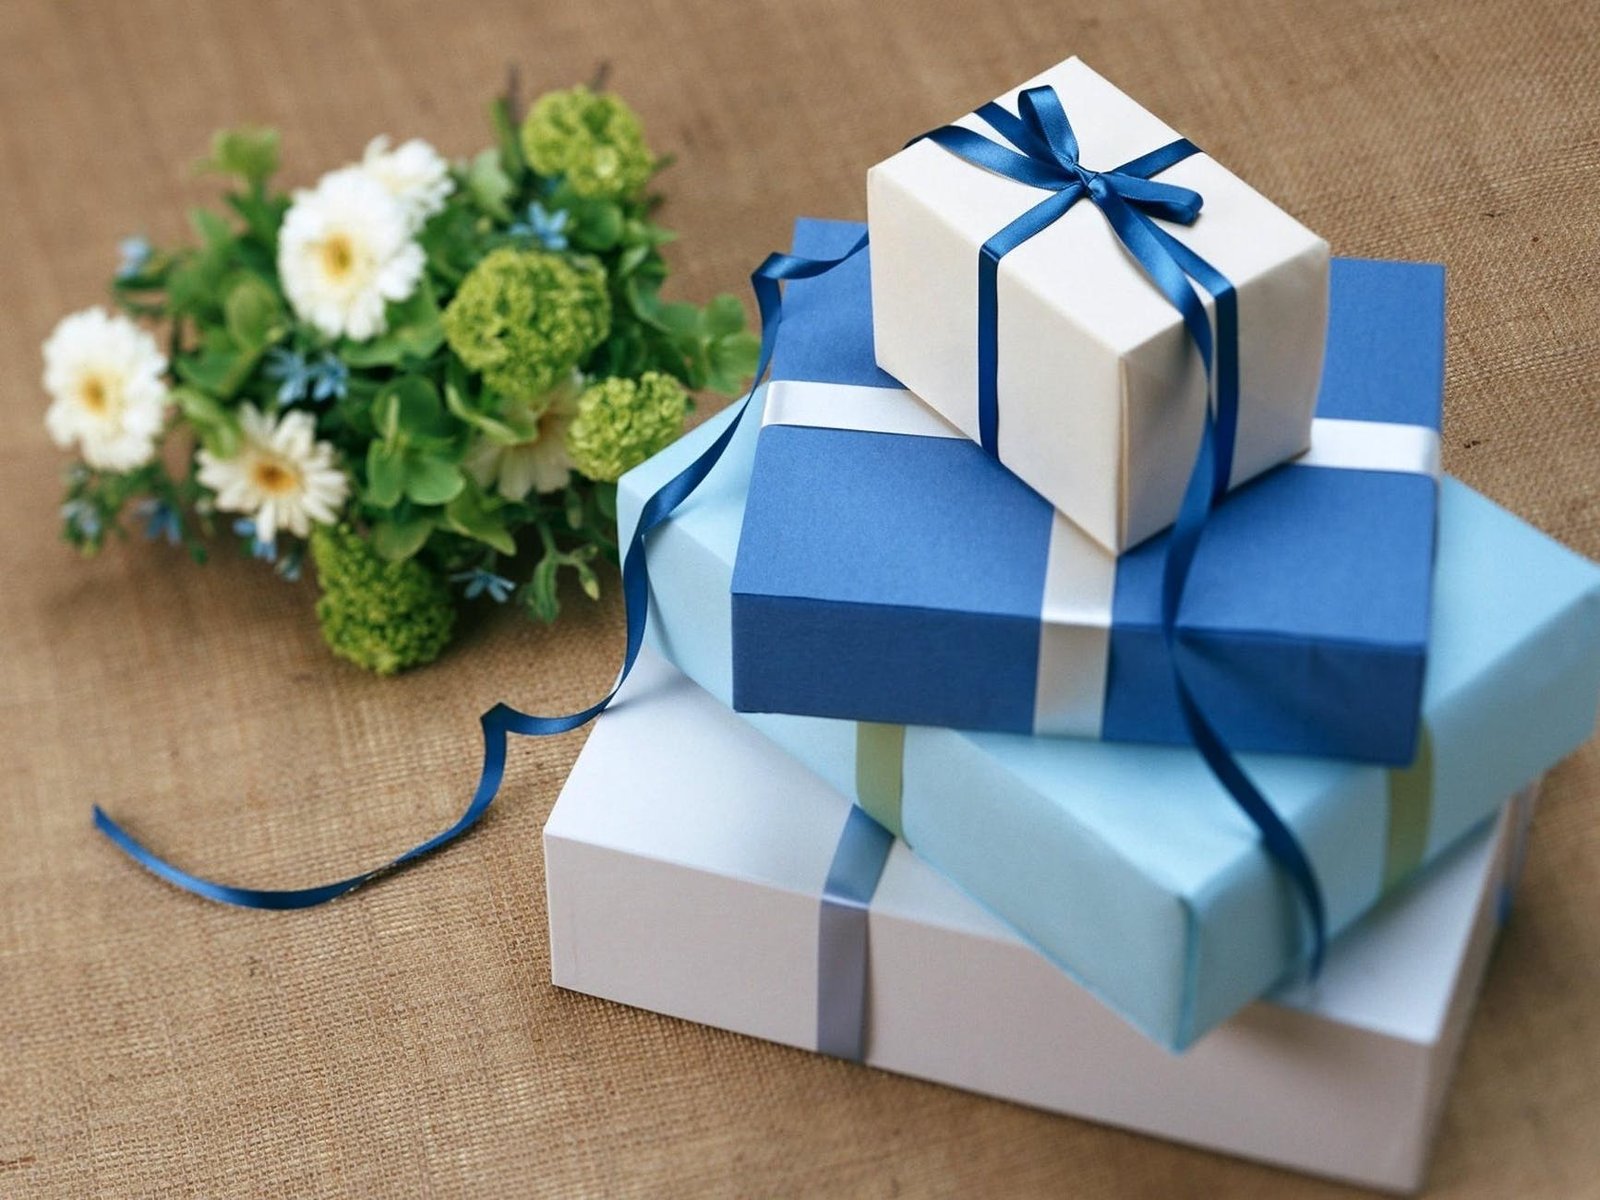 Occasion On Which You Can Present Floral Gifts